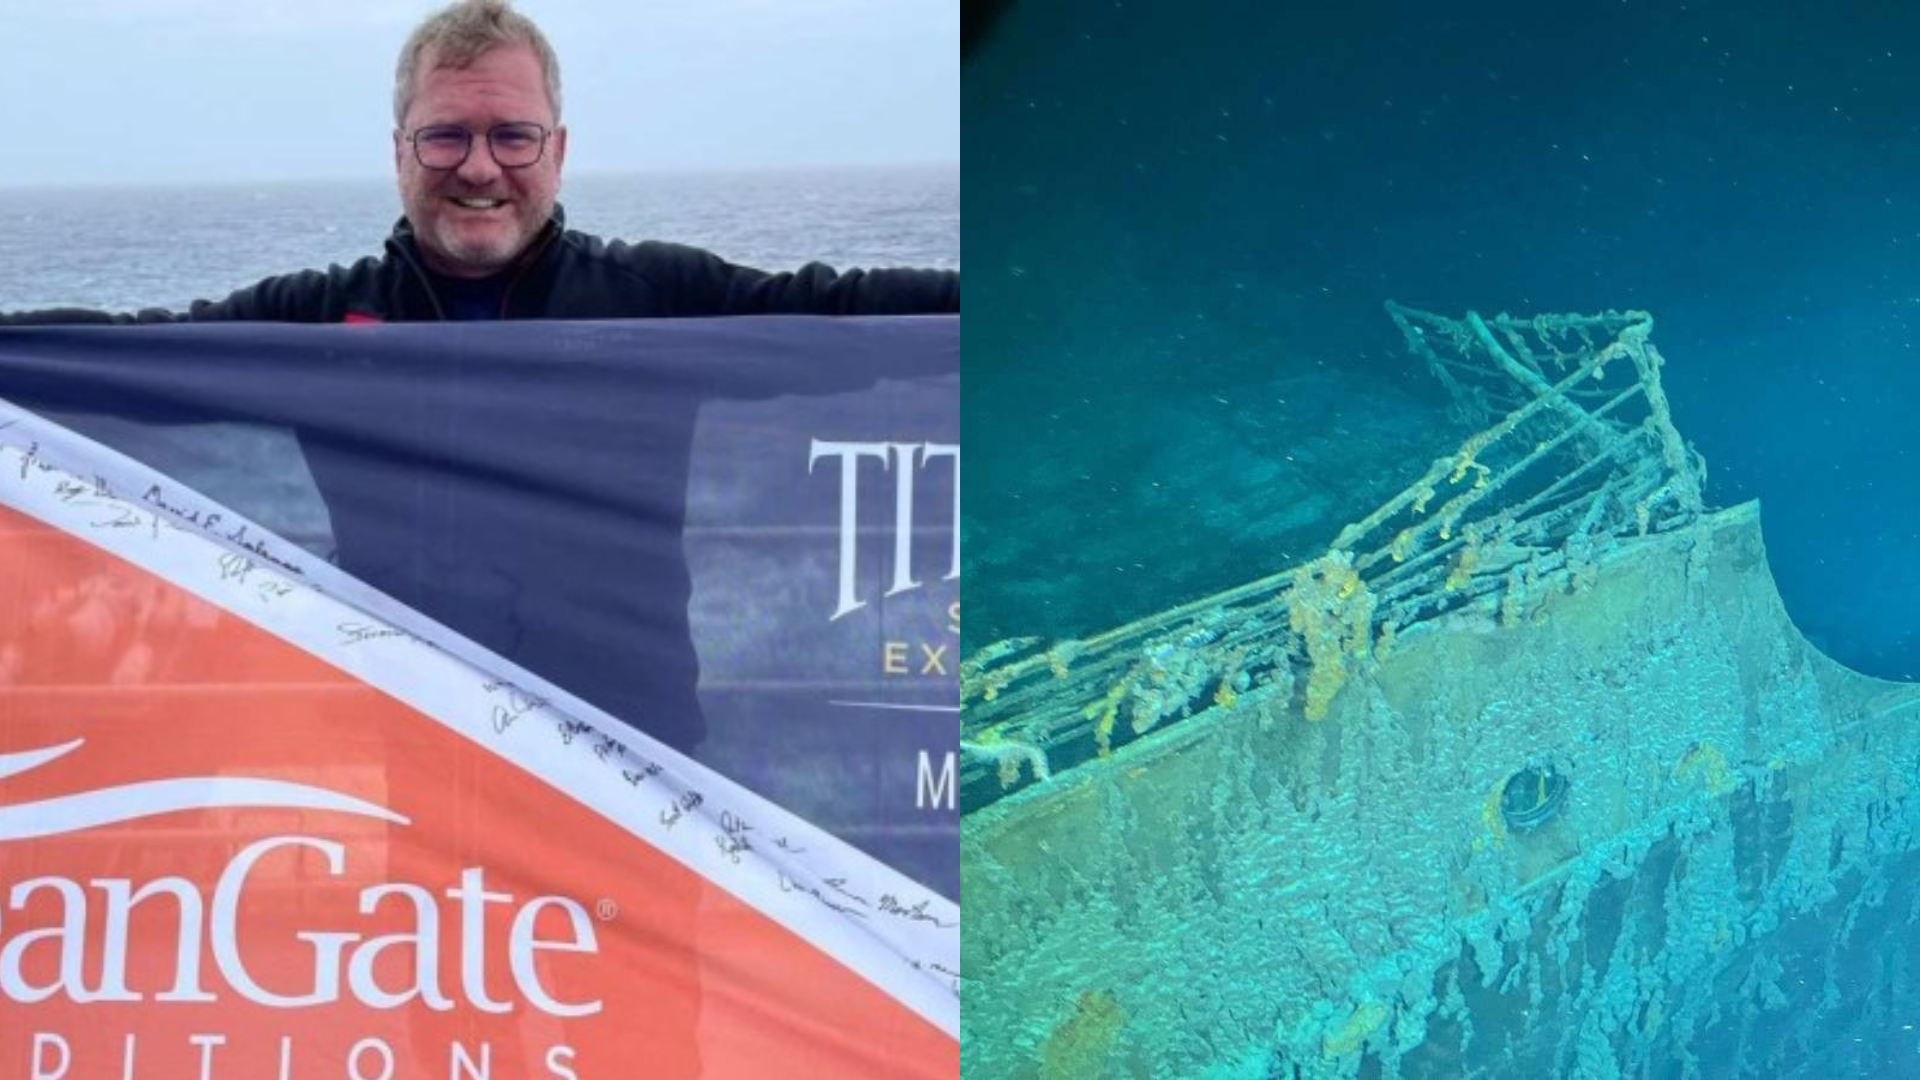 German publishes photos of the Titanic in flight on the Titan, experience details: “very uncomfortable”